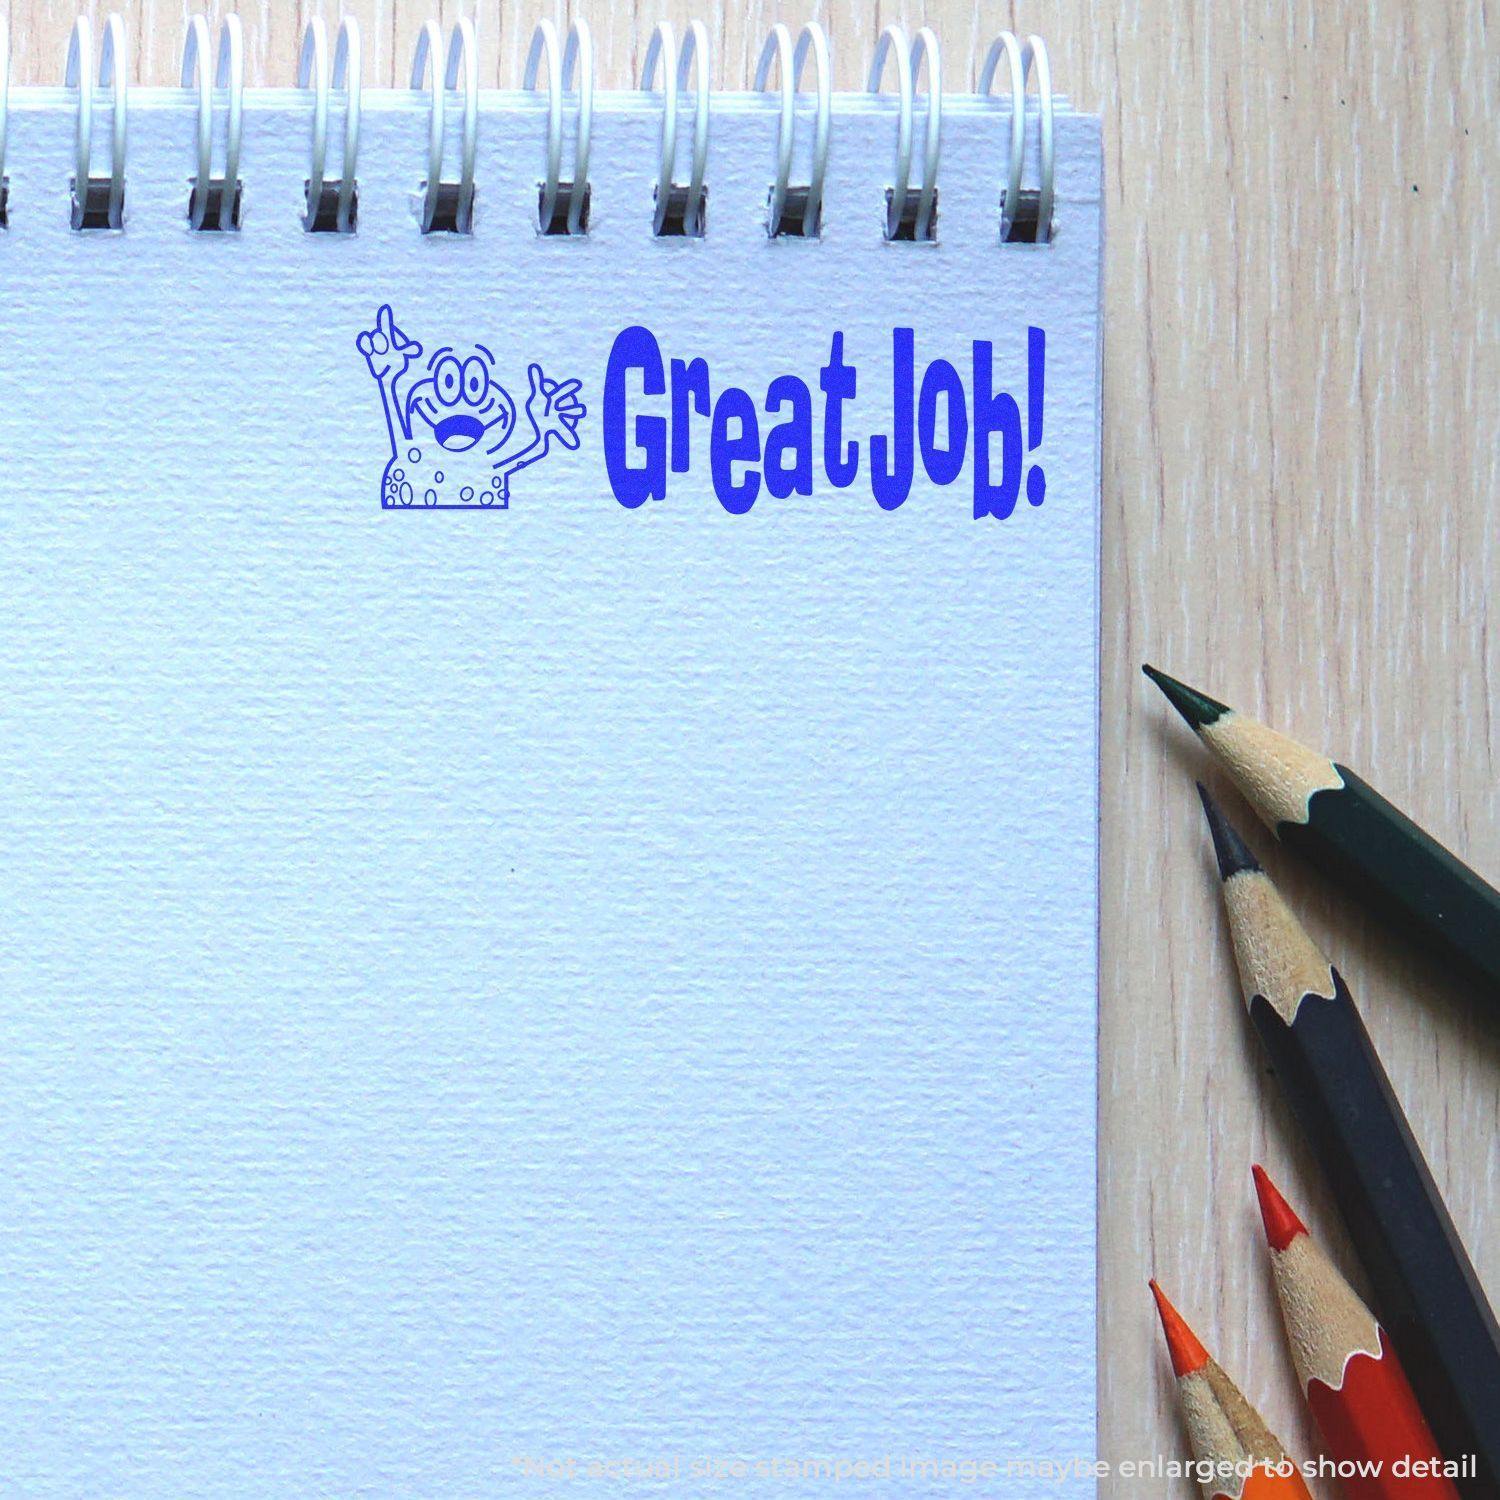 A self-inking stamp with a stamped image showing how the text "Great Job!" in a large font with an image of a frog (on the left side of the text whose hands are up in the air) is displayed by it after stamping.